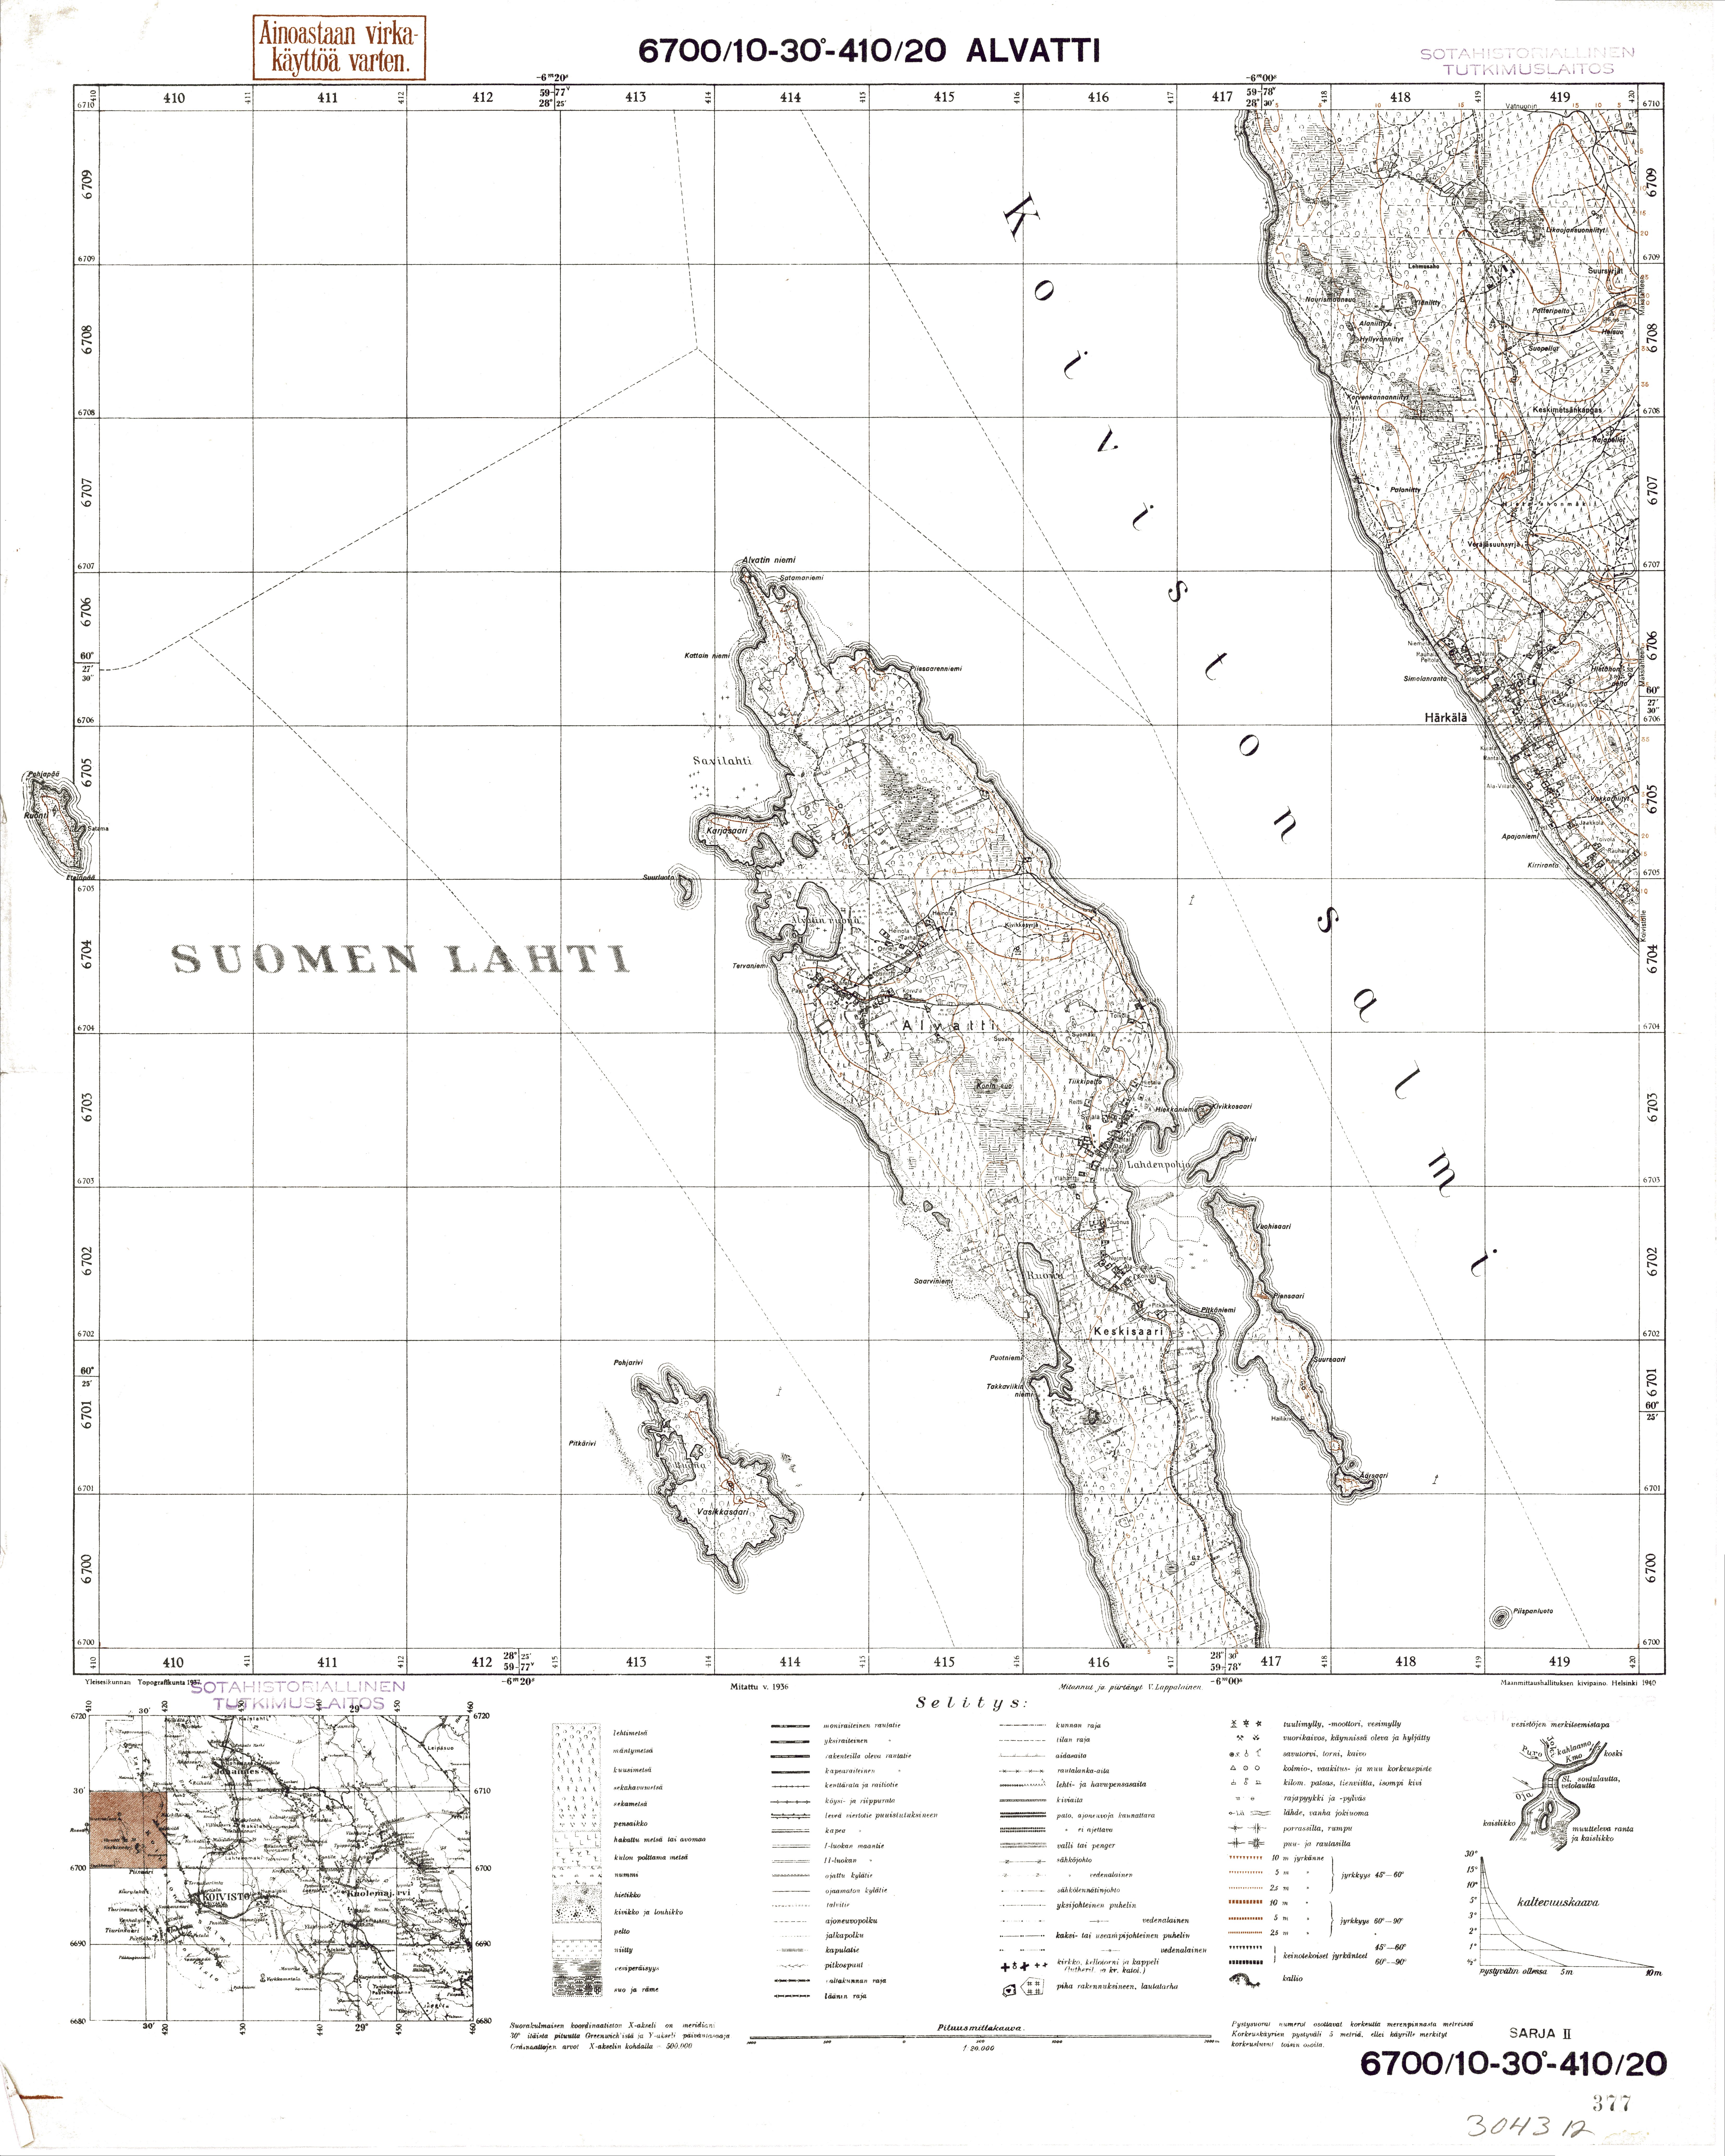 Veprevo. Alvatti. Topografikartta 304312. Topographic map from 1938. Use the zooming tool to explore in higher level of detail. Obtain as a quality print or high resolution image